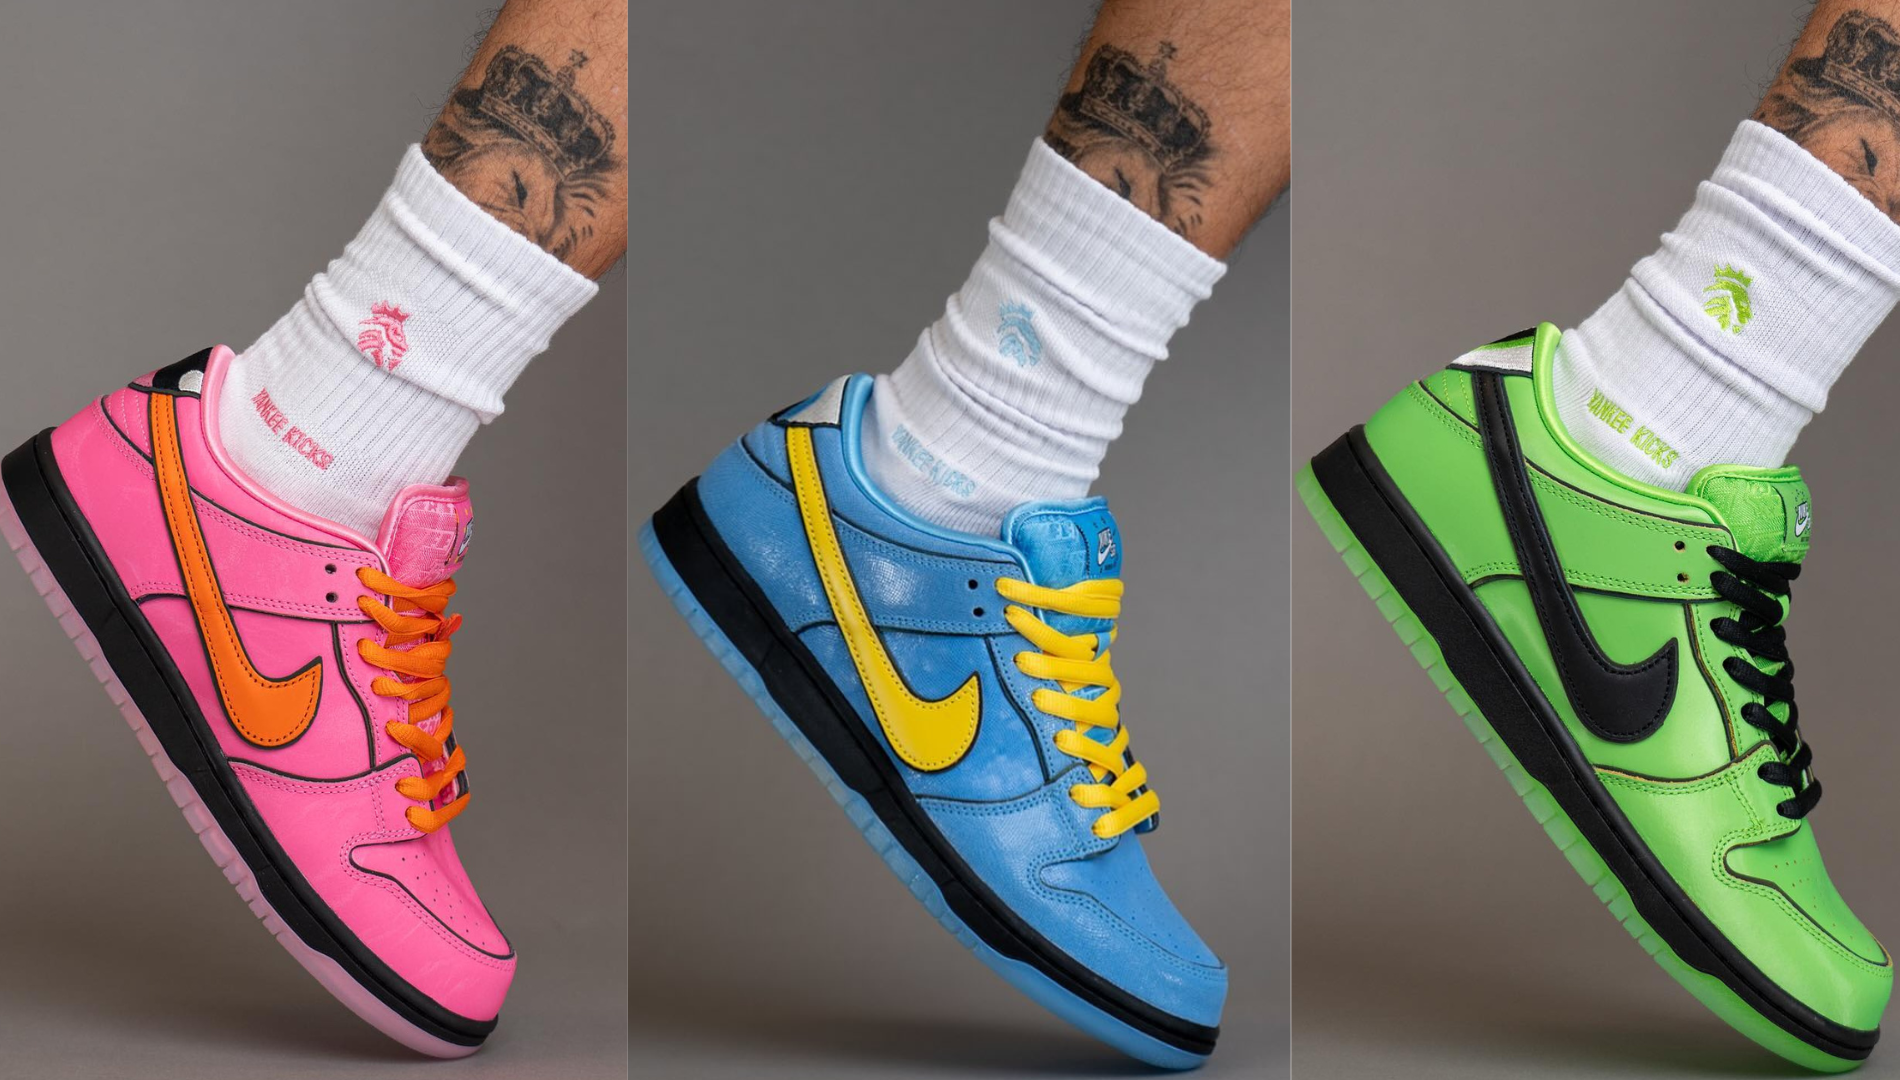 Here's An On-Foot Look At the Powerpuff Girls x Nike SB Dunk Low